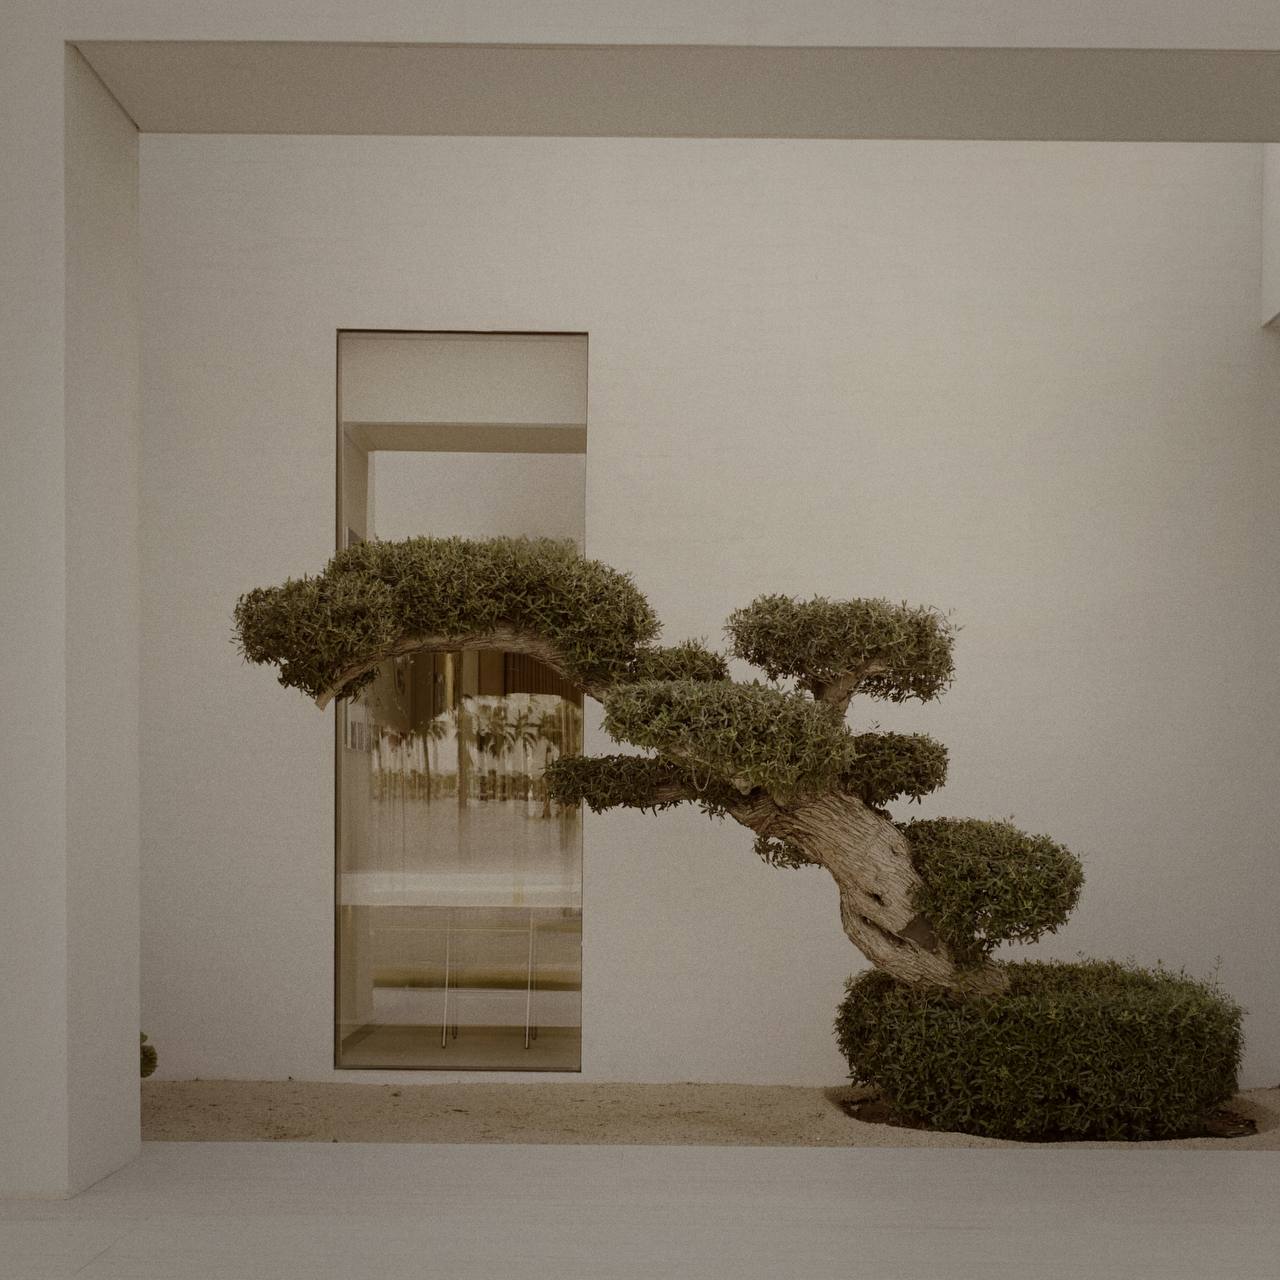 Featured image of a bonsai tree in front of Enso Design Lab's office, showcasing the brand's serene and aesthetically pleasing environment. Creative Director Ani Han is mentioned.